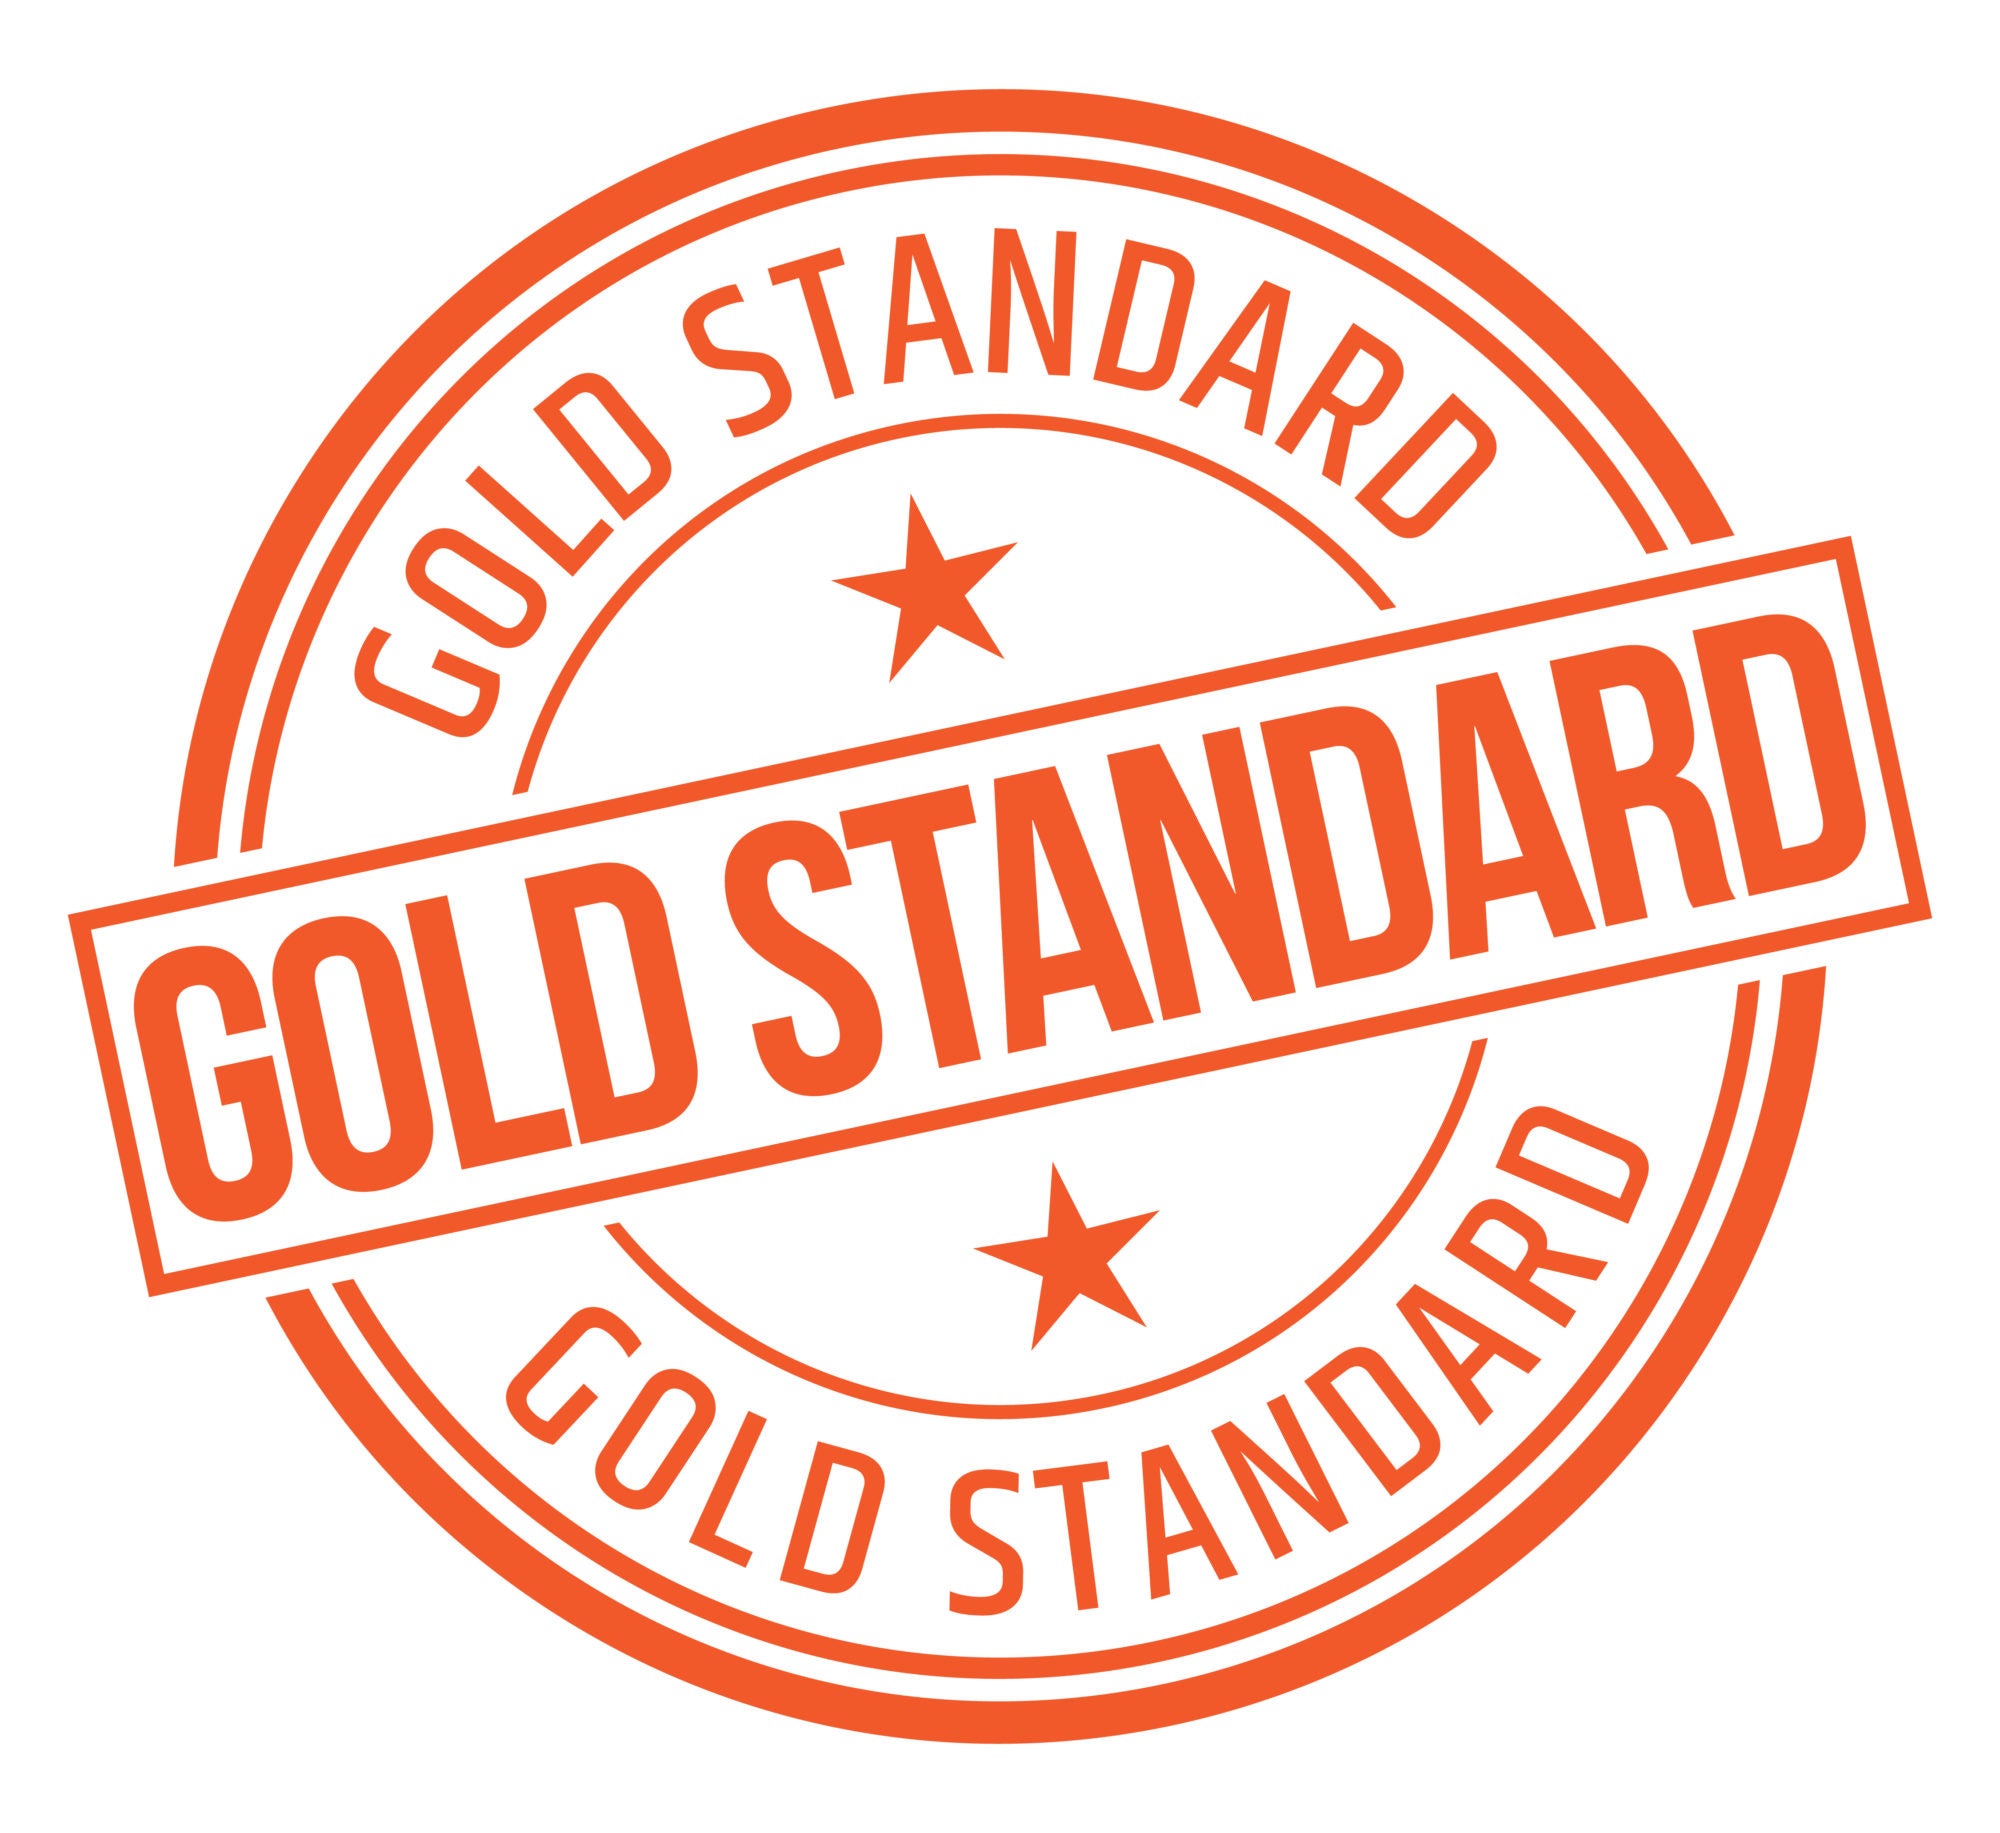 LEARN ABOUT THE GOLD STANDARD PT. 2: WHAT IS THE GOLD STANDARD?